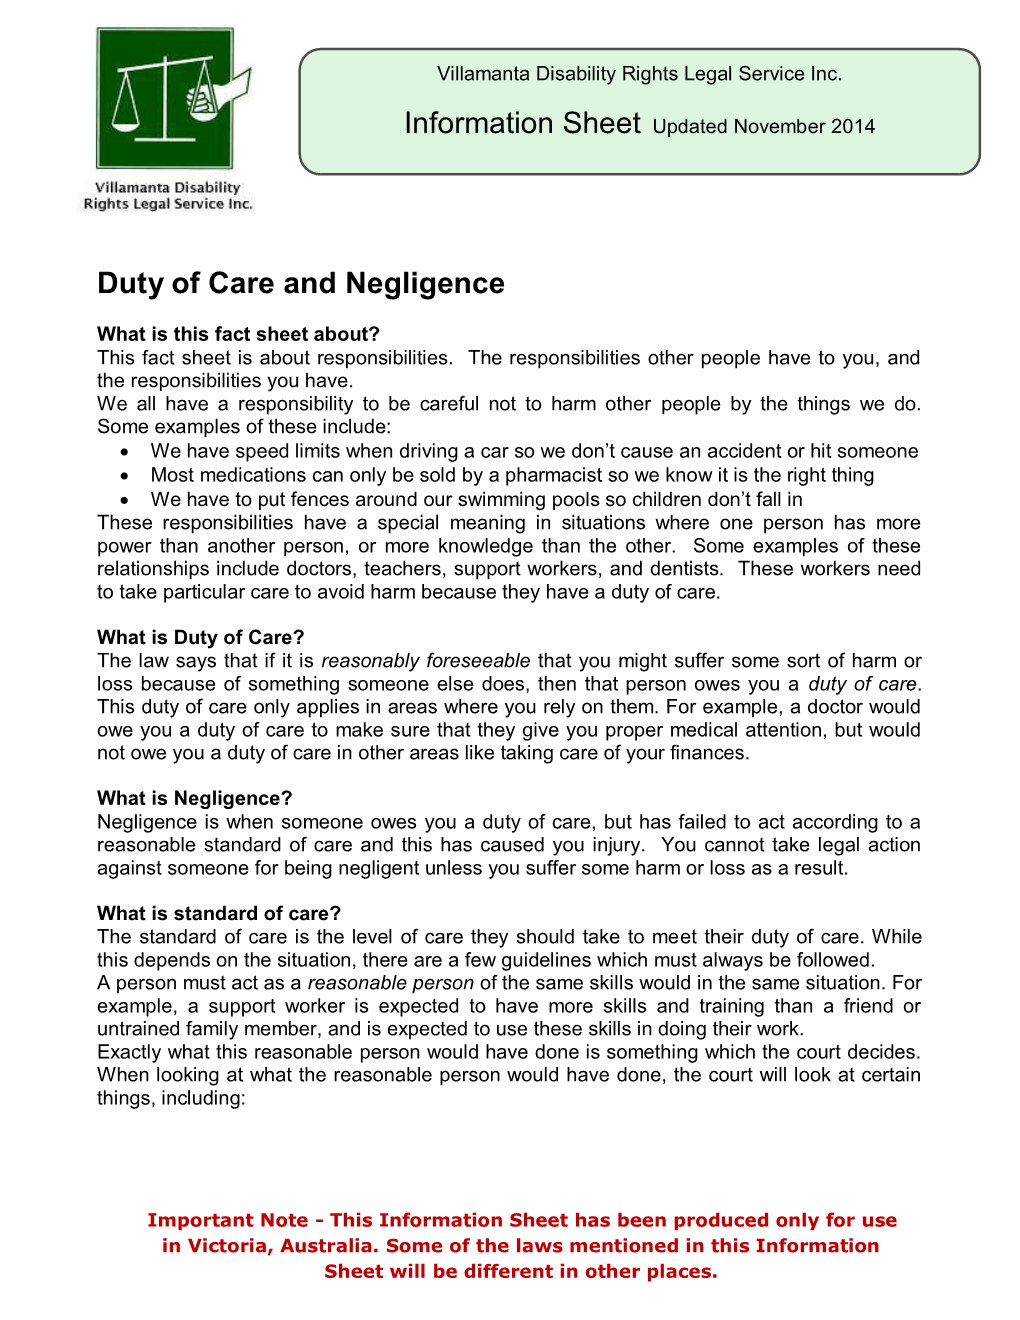 Duty of Care and Negligence